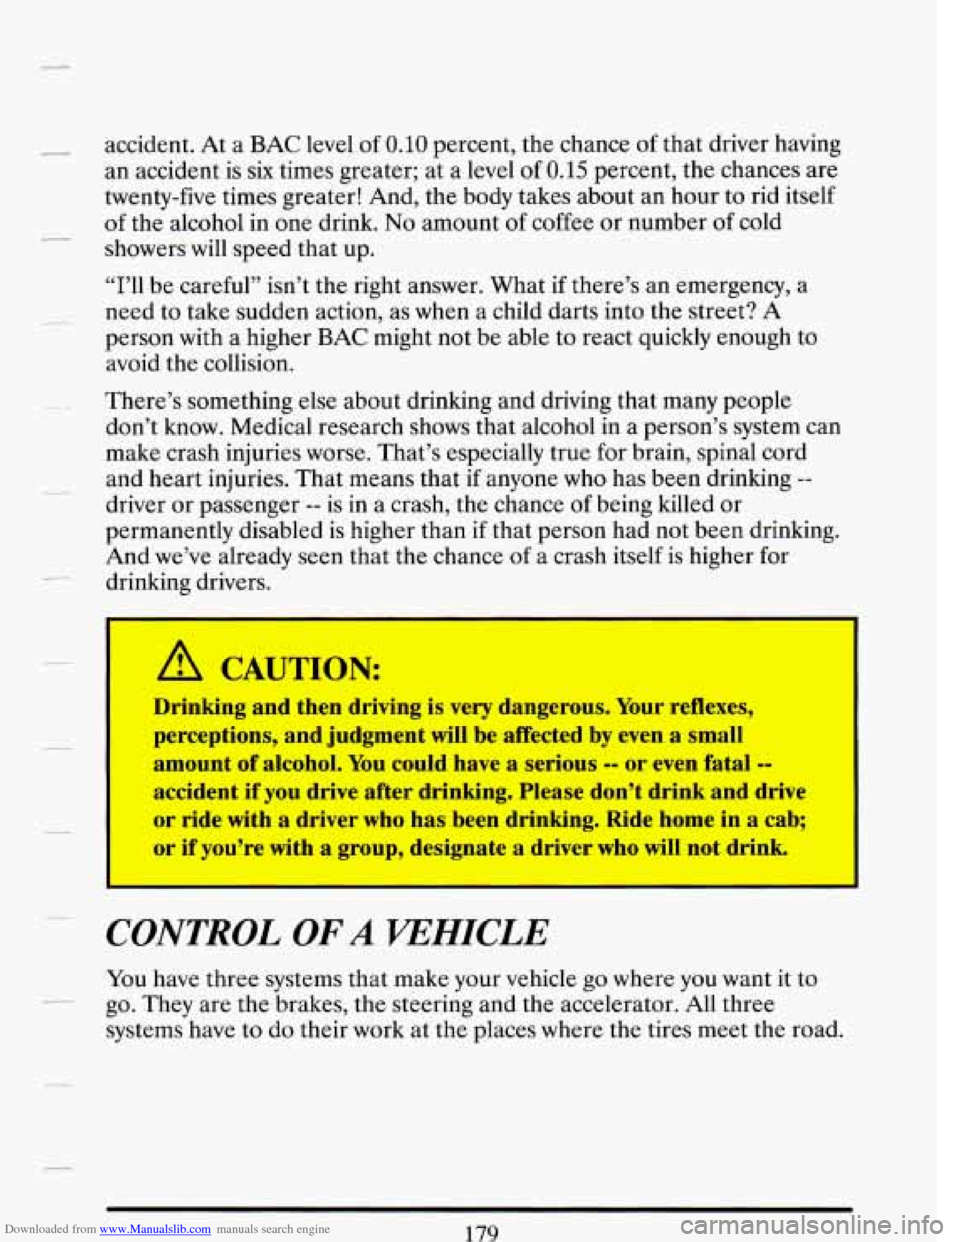 CADILLAC DEVILLE 1993 7.G Owners Manual Downloaded from www.Manualslib.com manuals search engine - accident. At a BAC level of 0.10 percent,  the chance  of that  driver  having 
an  accident  is 
six times greater;  at a level of 0.15 perc